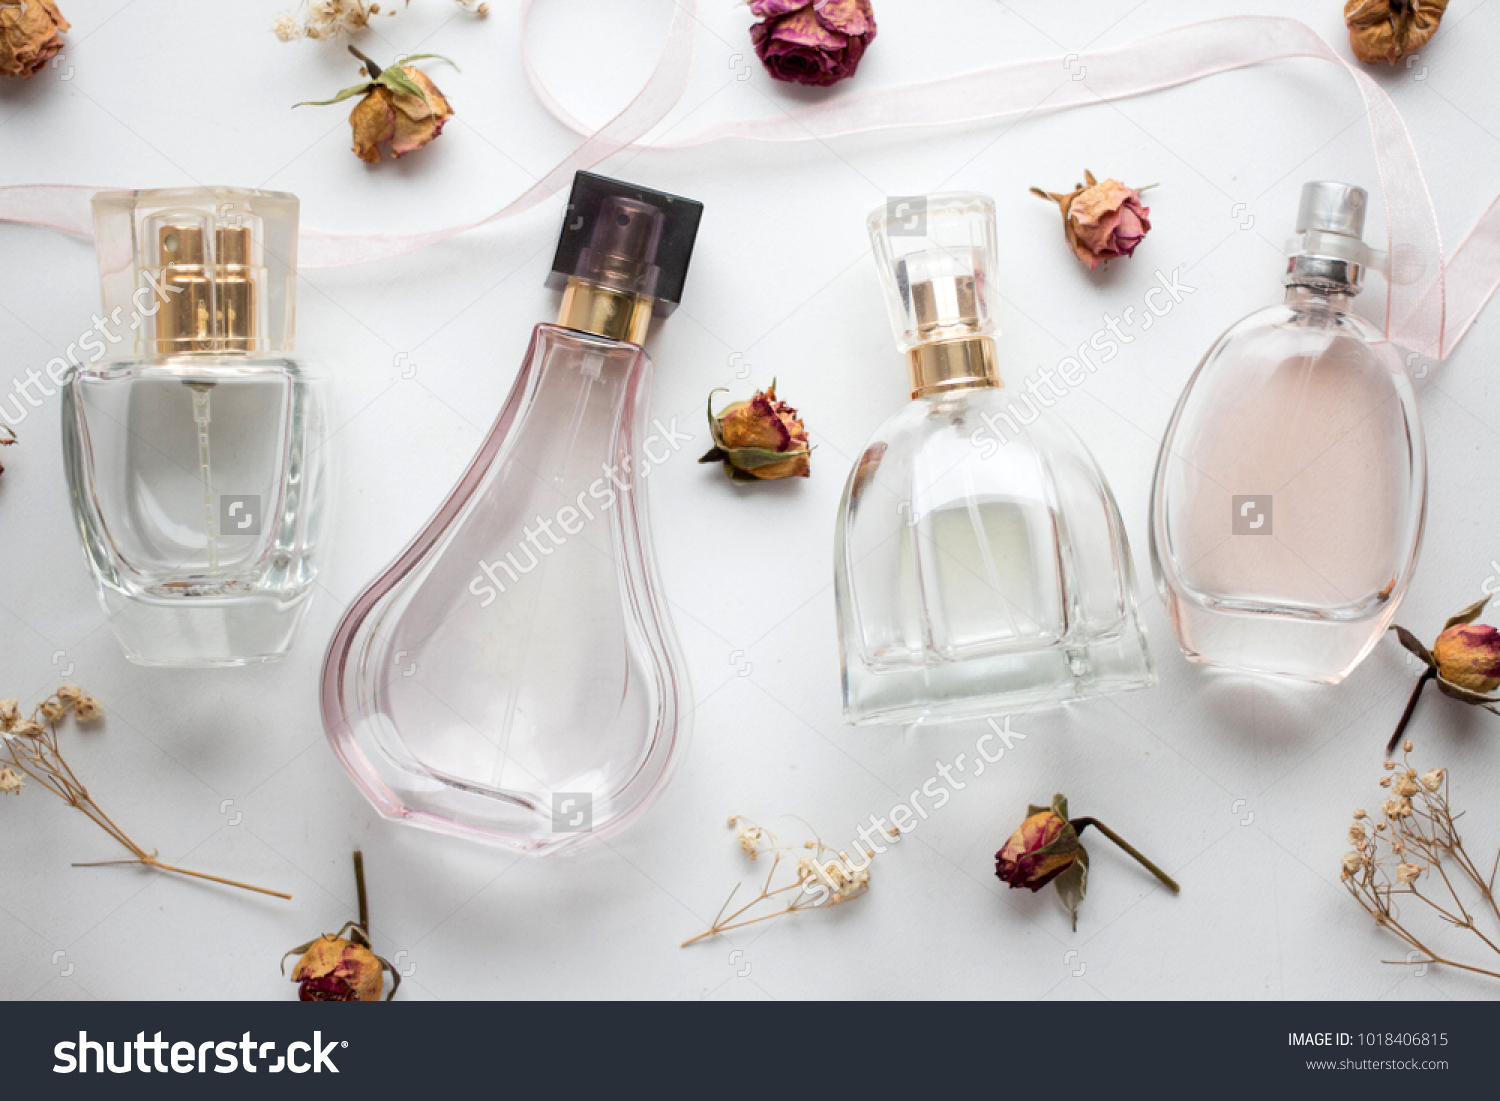 bottle of woman perfume on white background with roses. gift. #1018406815